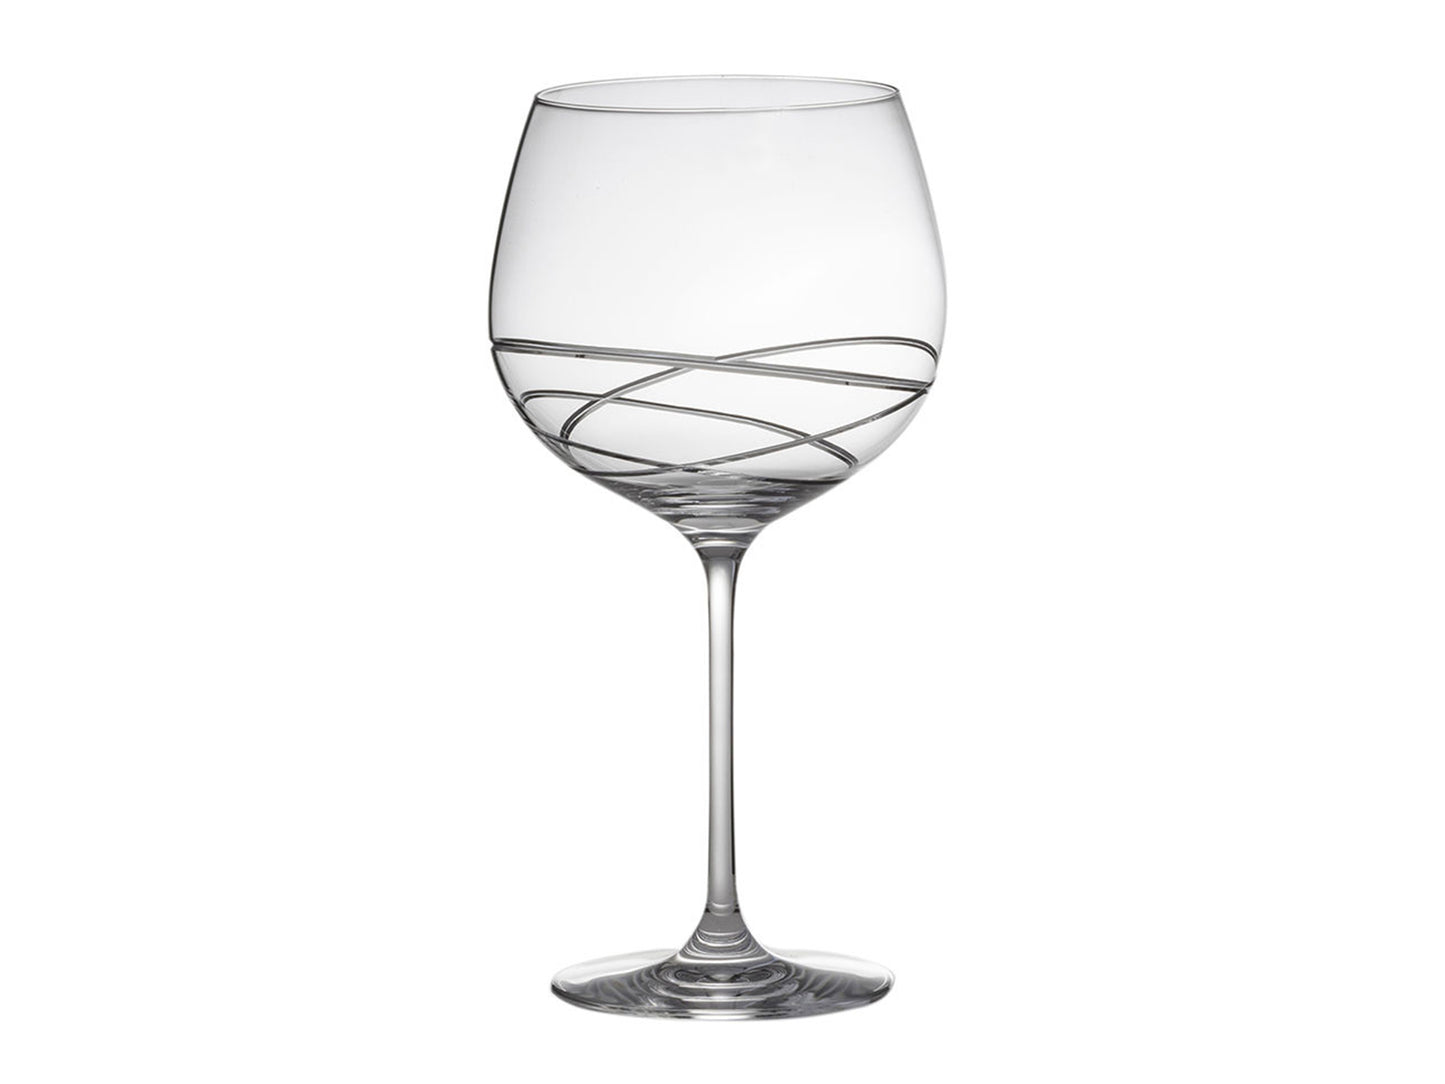 A single crystal gin copa glass that is cut with entwining orbital lines around the base of the bowl